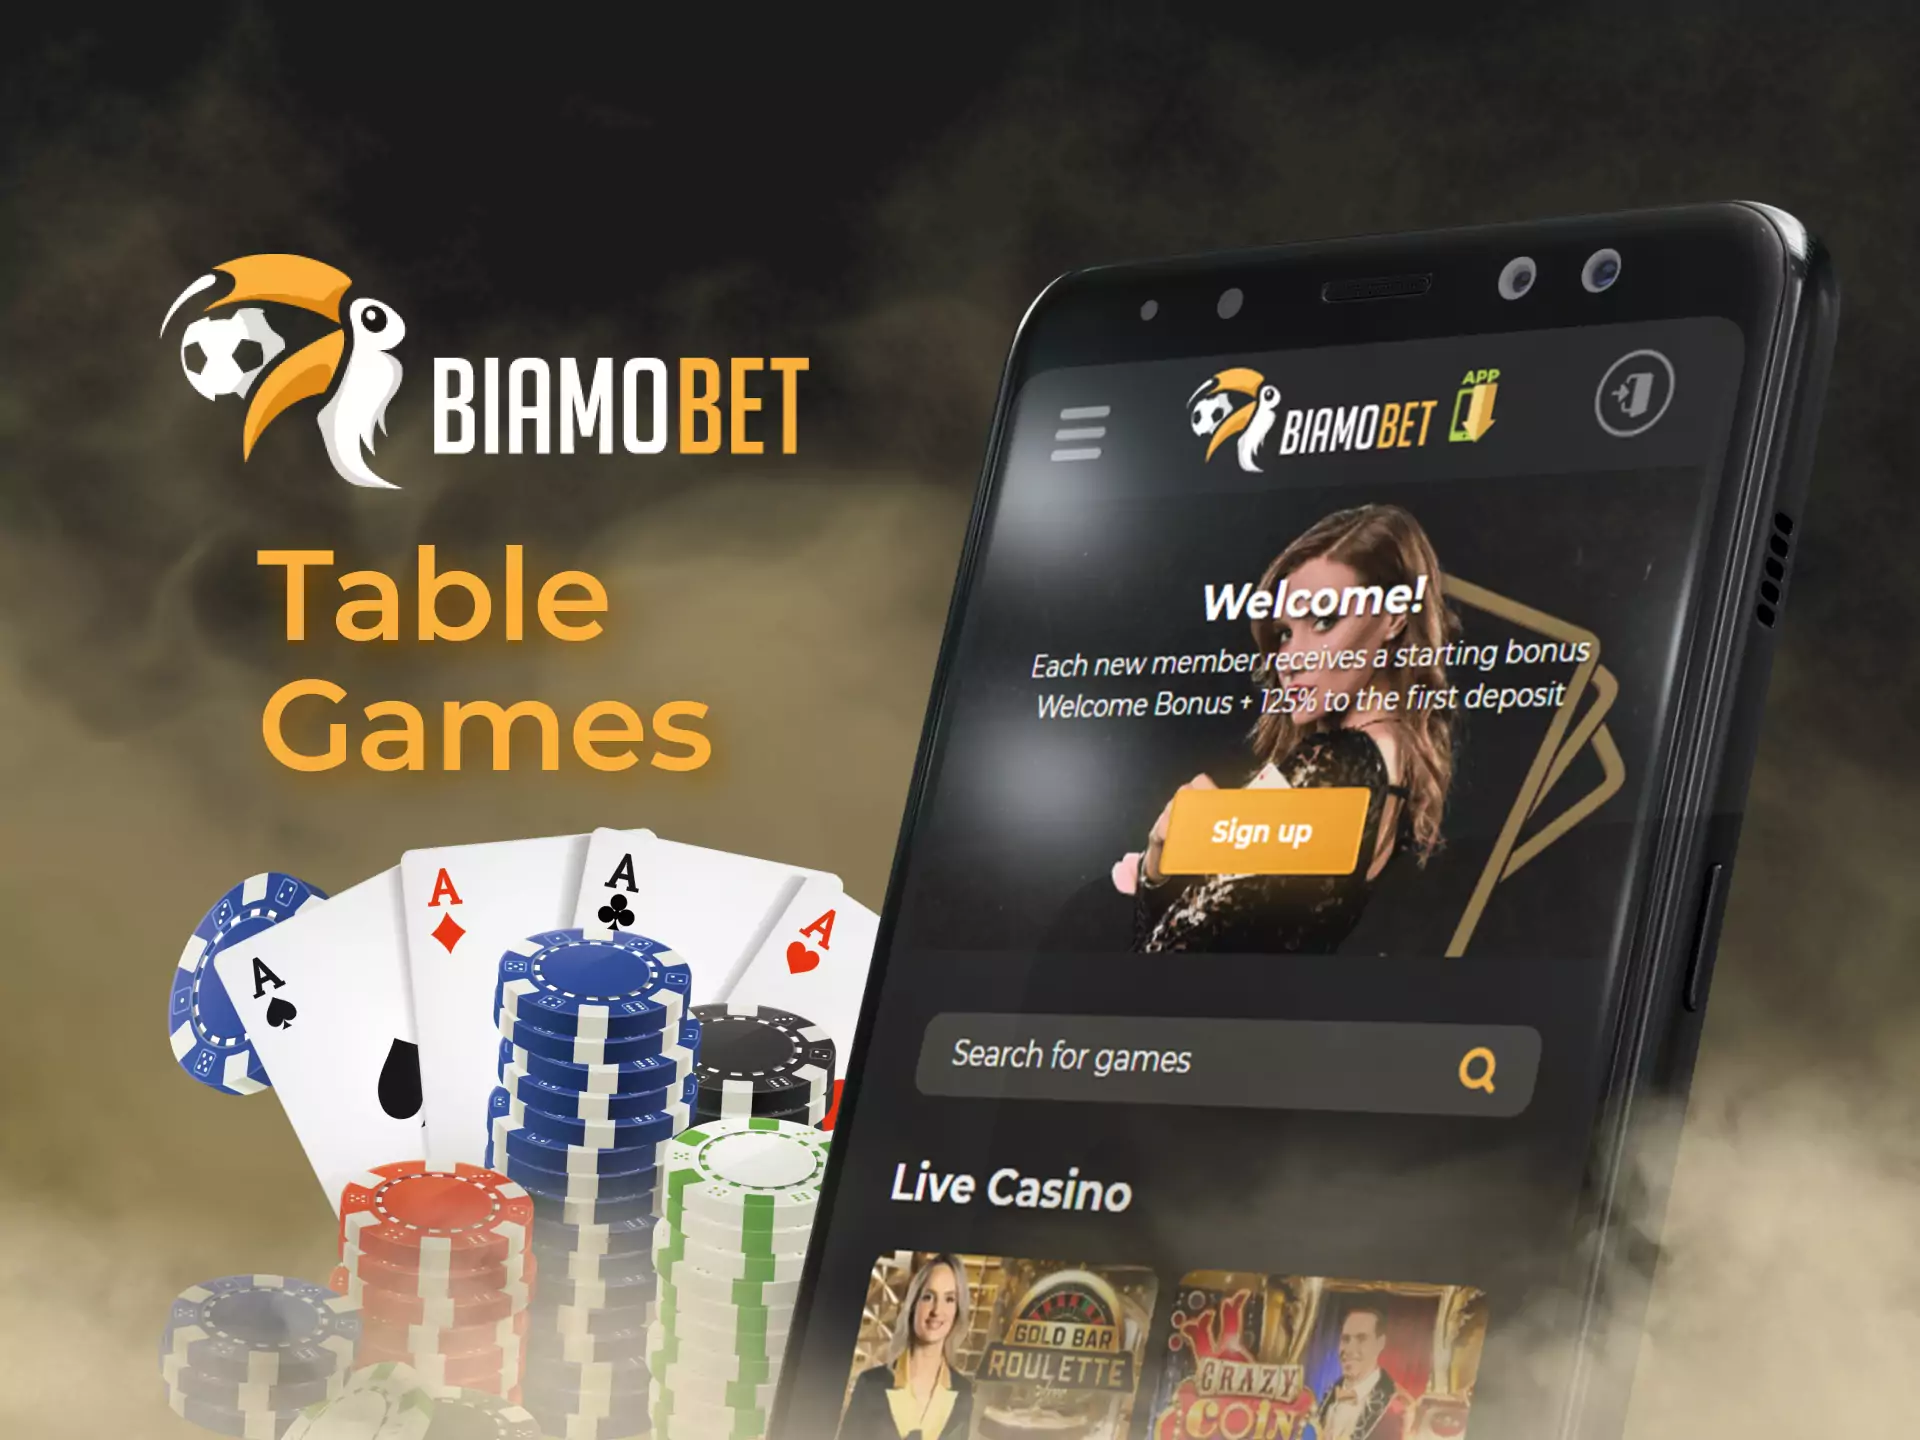 You can play table games from roulette to poker in the Biamobet Live Casino.